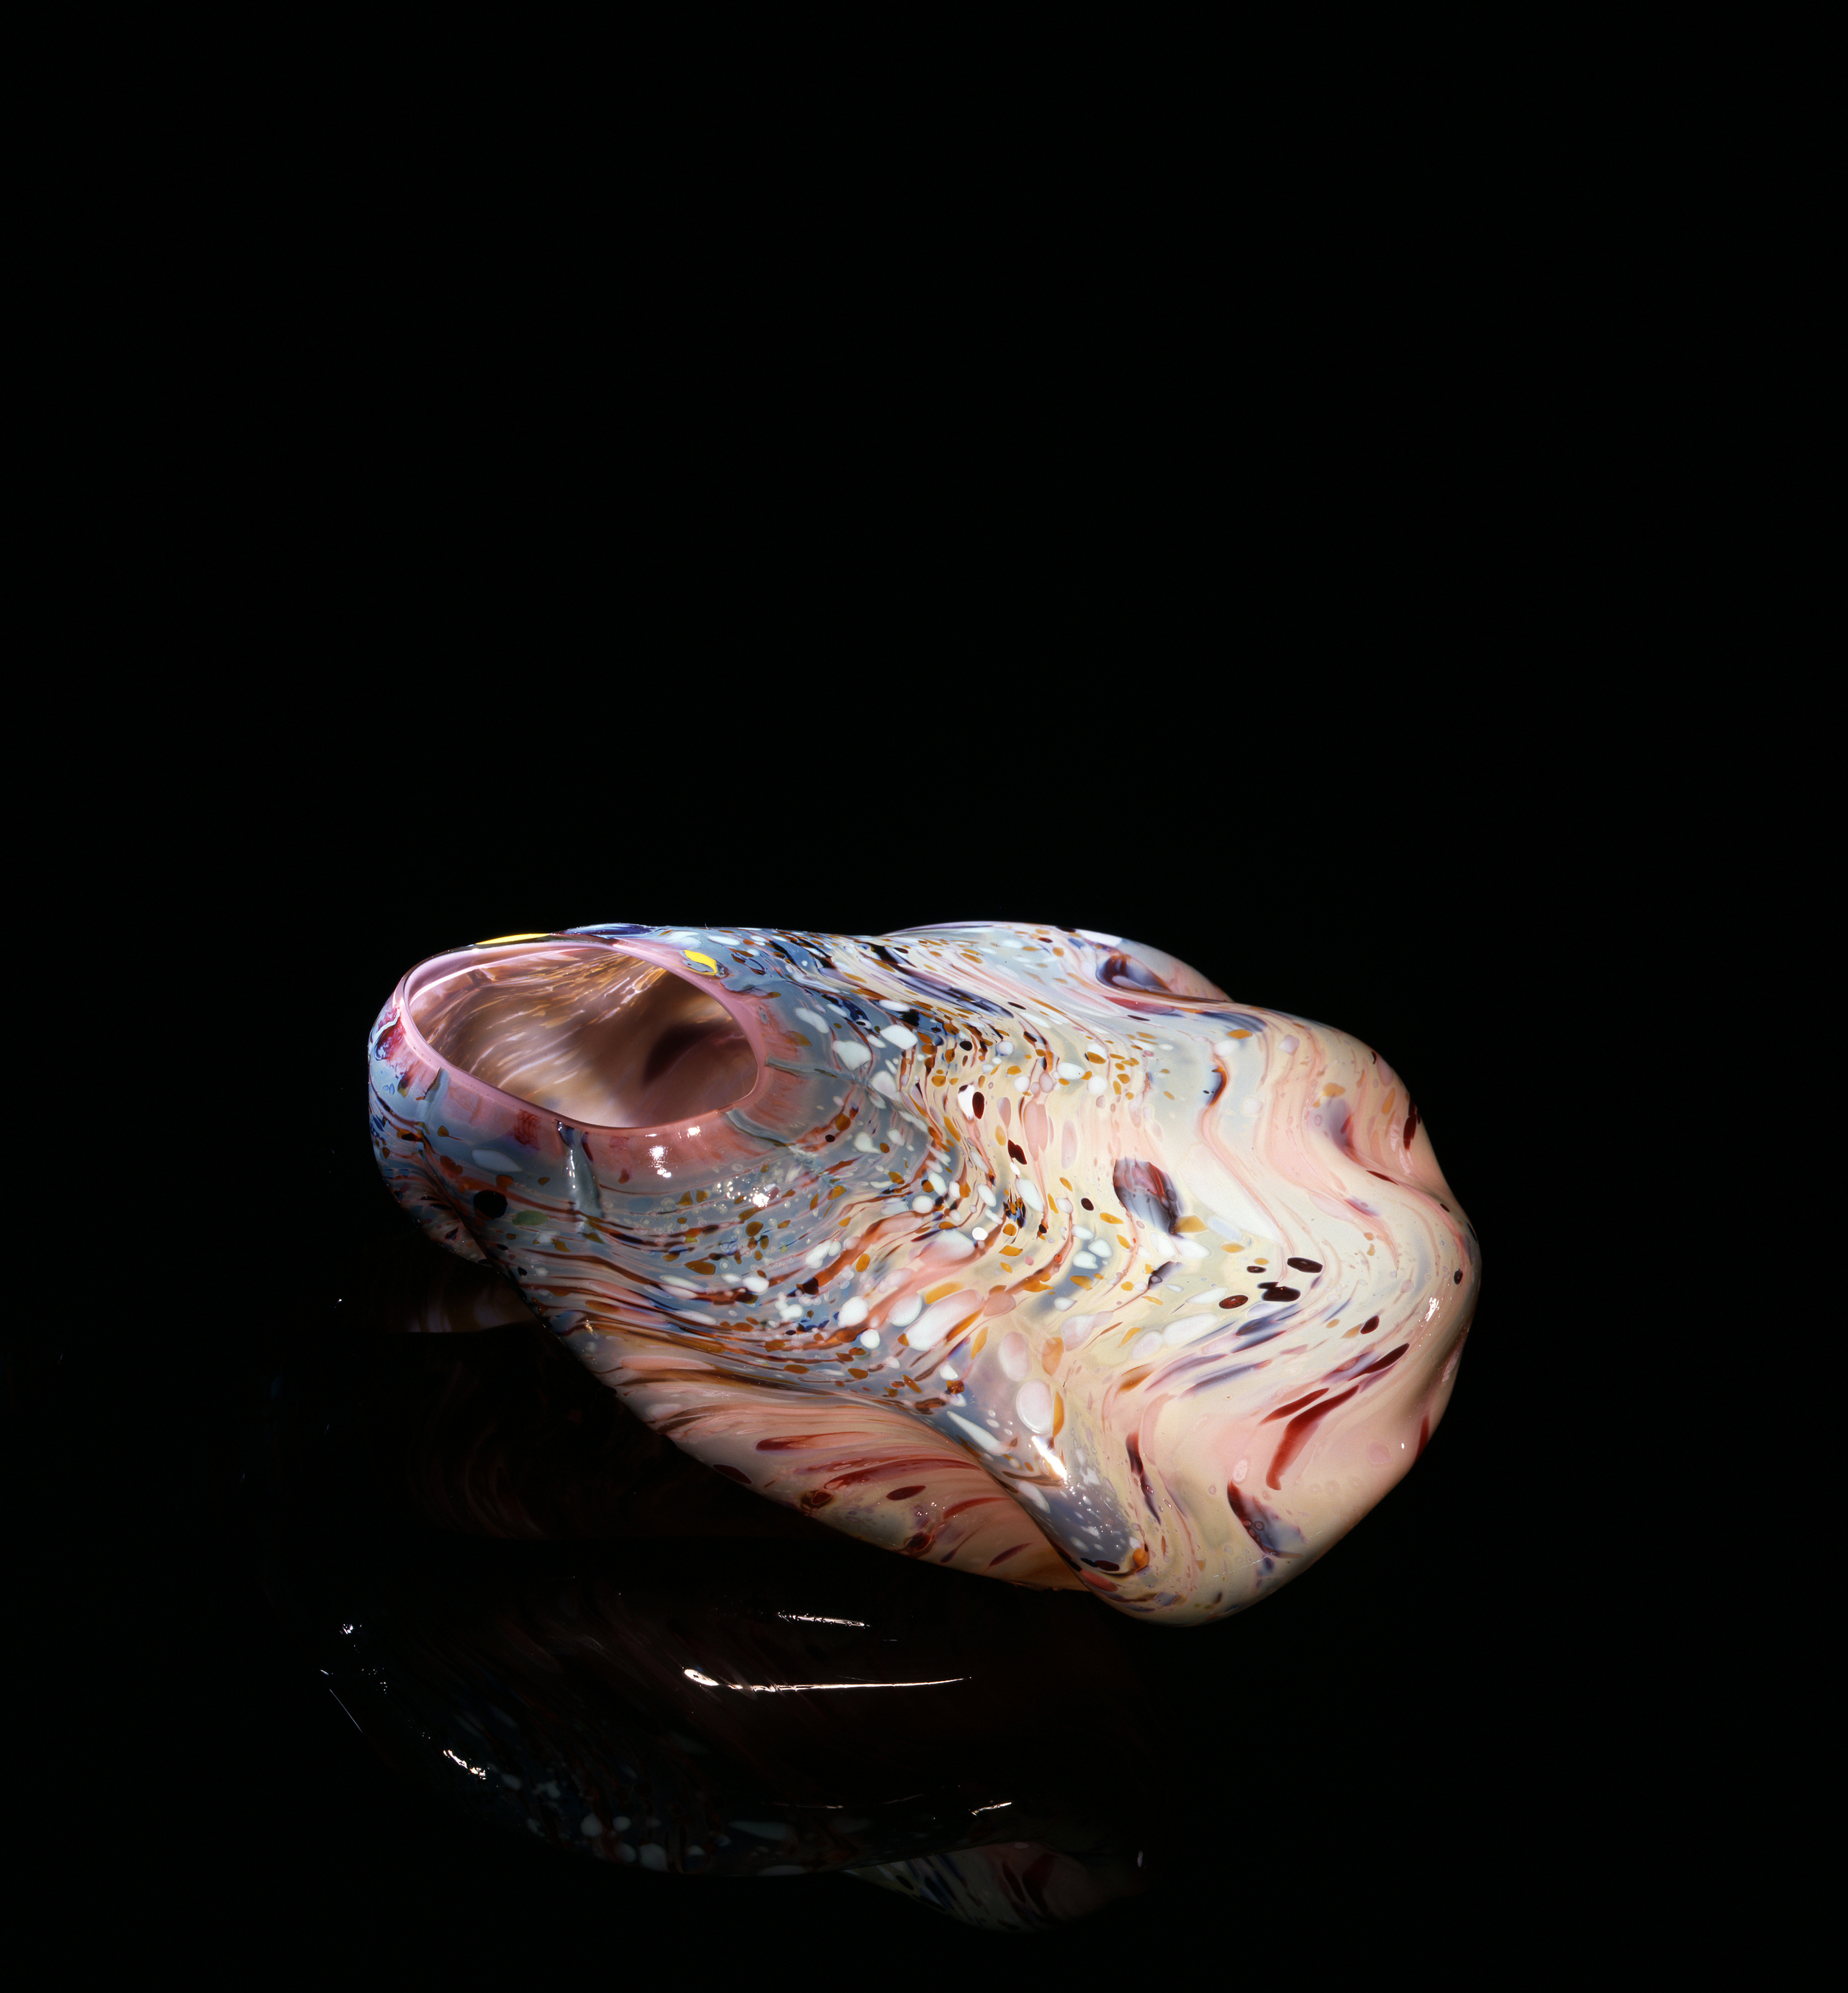  Dale Chihuly,&nbsp; Almond Pink Macchia with Aero and Oxblood Jimmies&nbsp; (1982, glass, 5 x 10 x 8 inches), DC.62 